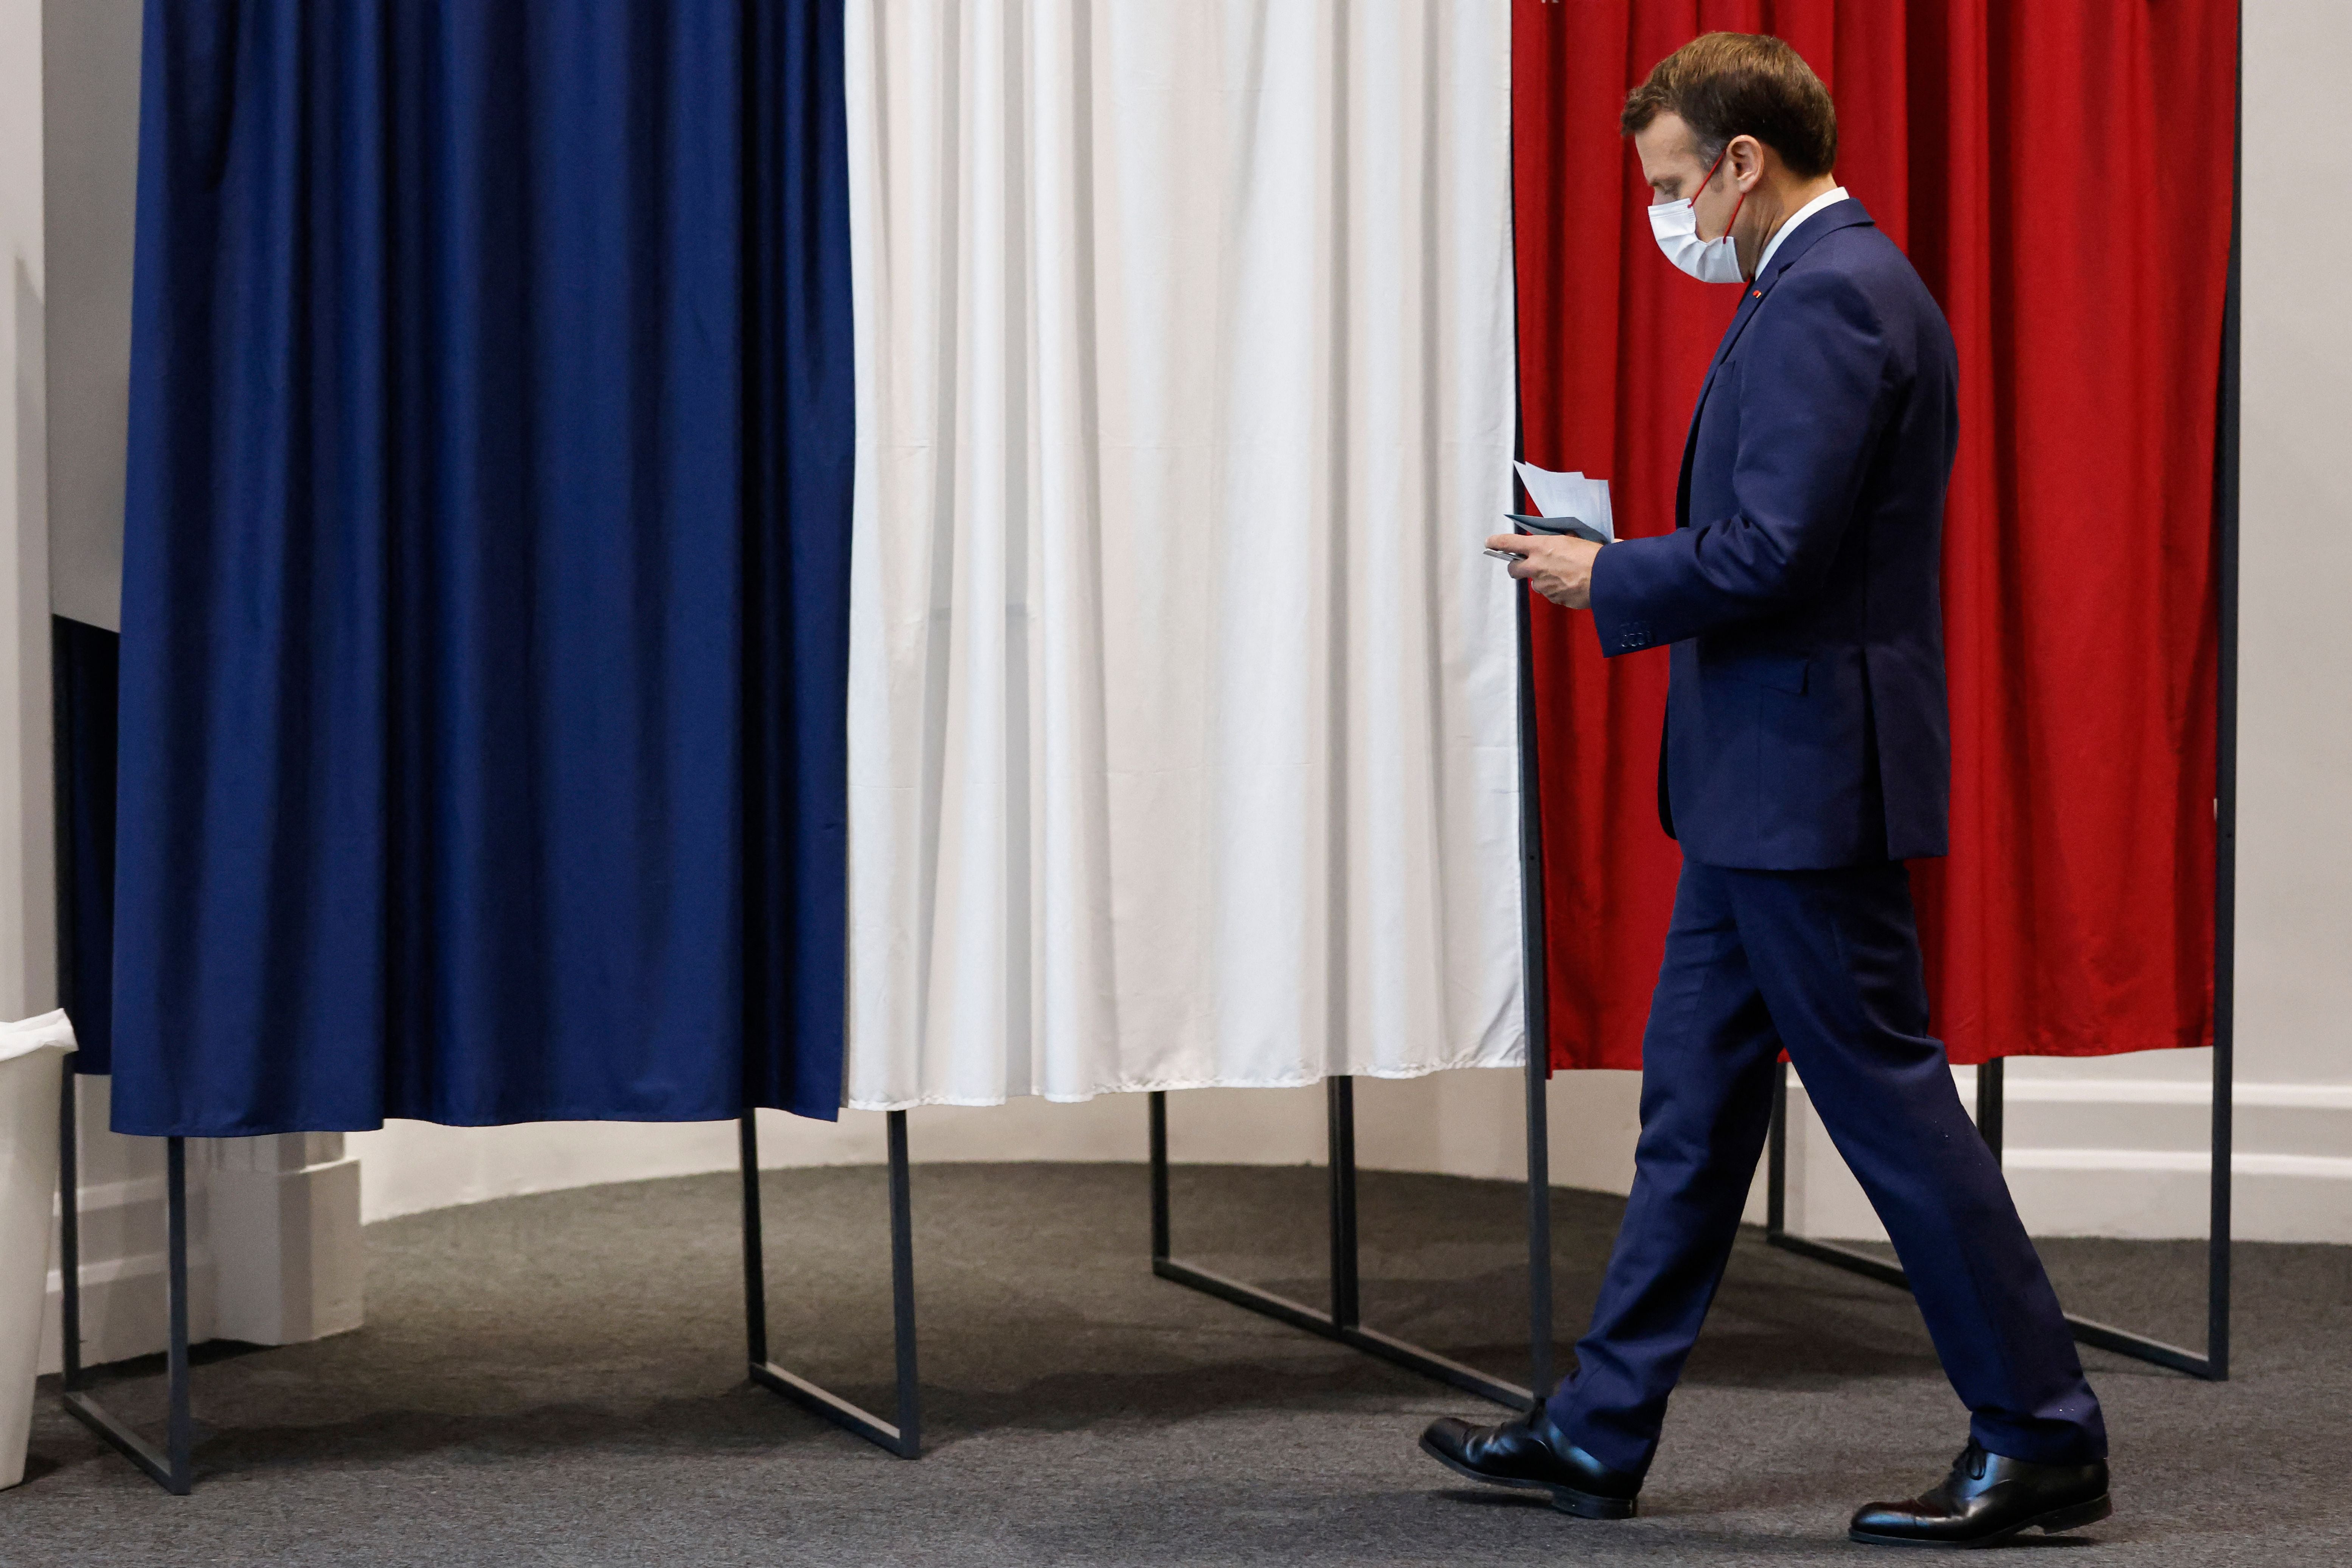 French president Emmanuel Macron votes in the regional election in Le Touquet on 27 June